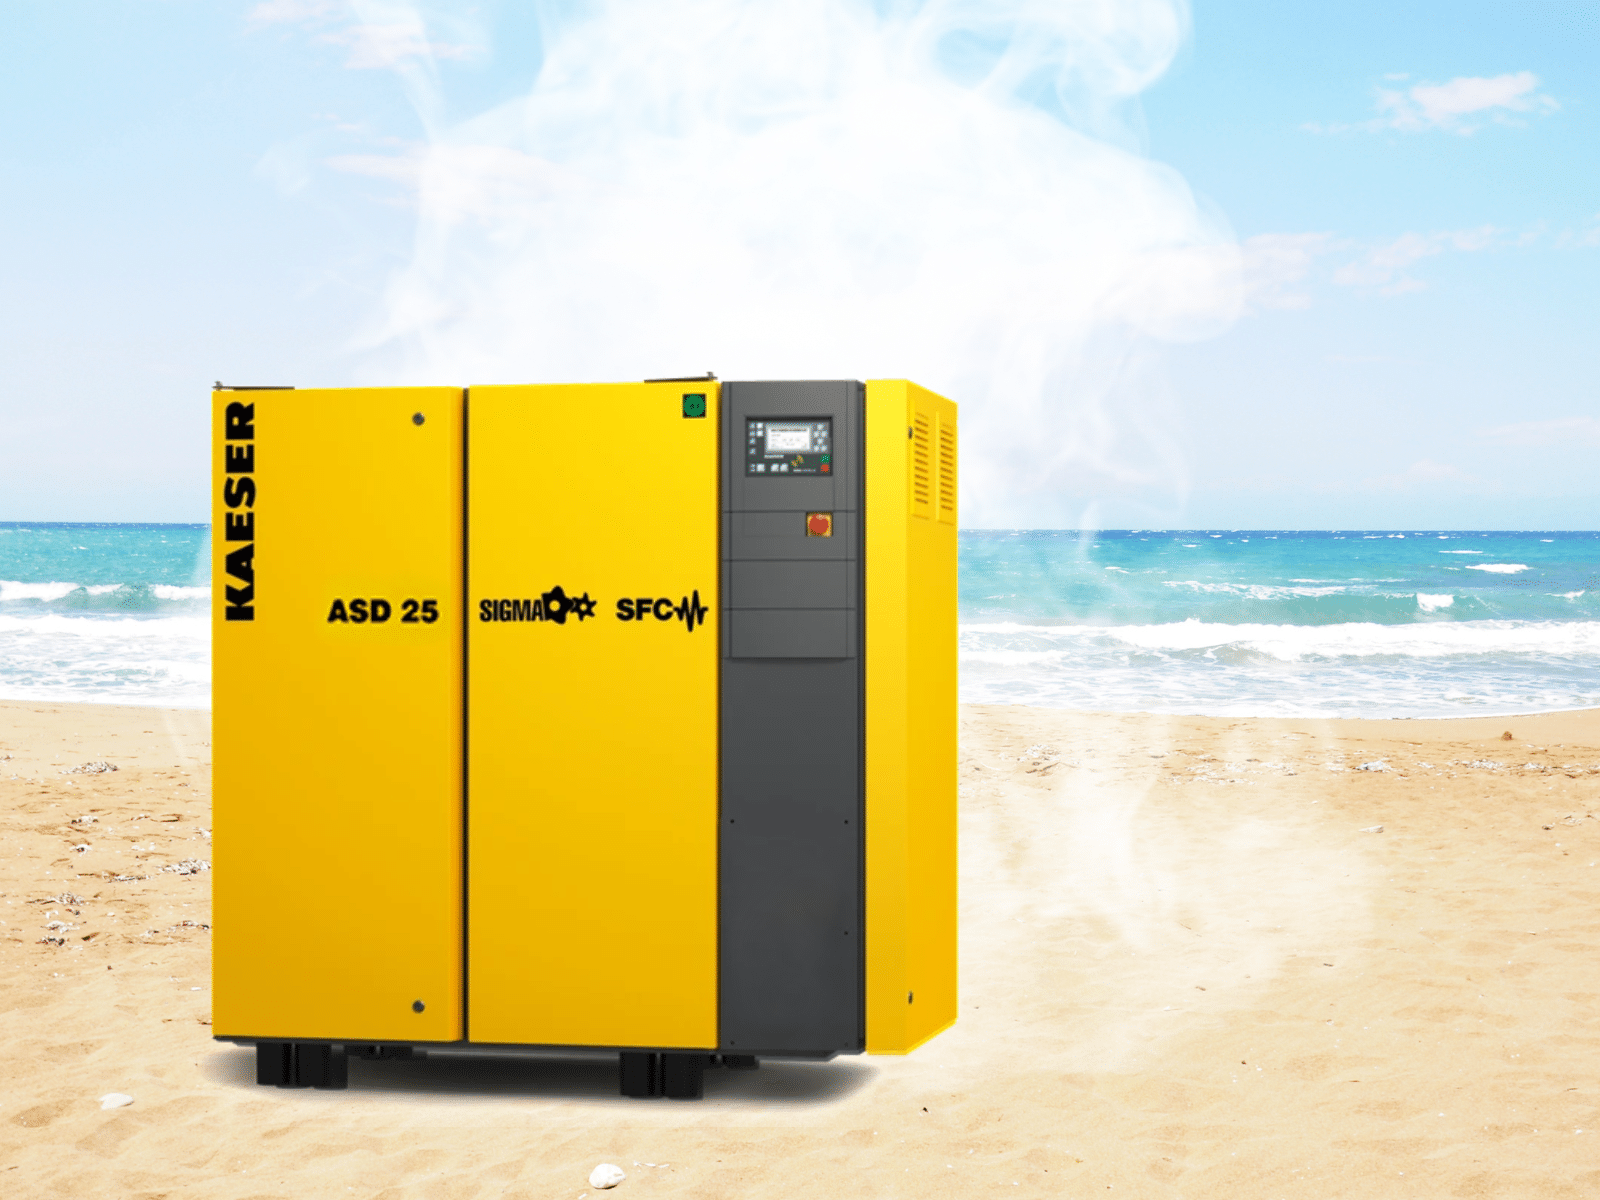 hot air compressor steaming on the beach to emphasize importance of preparing your air compressor for summer heat and humidity